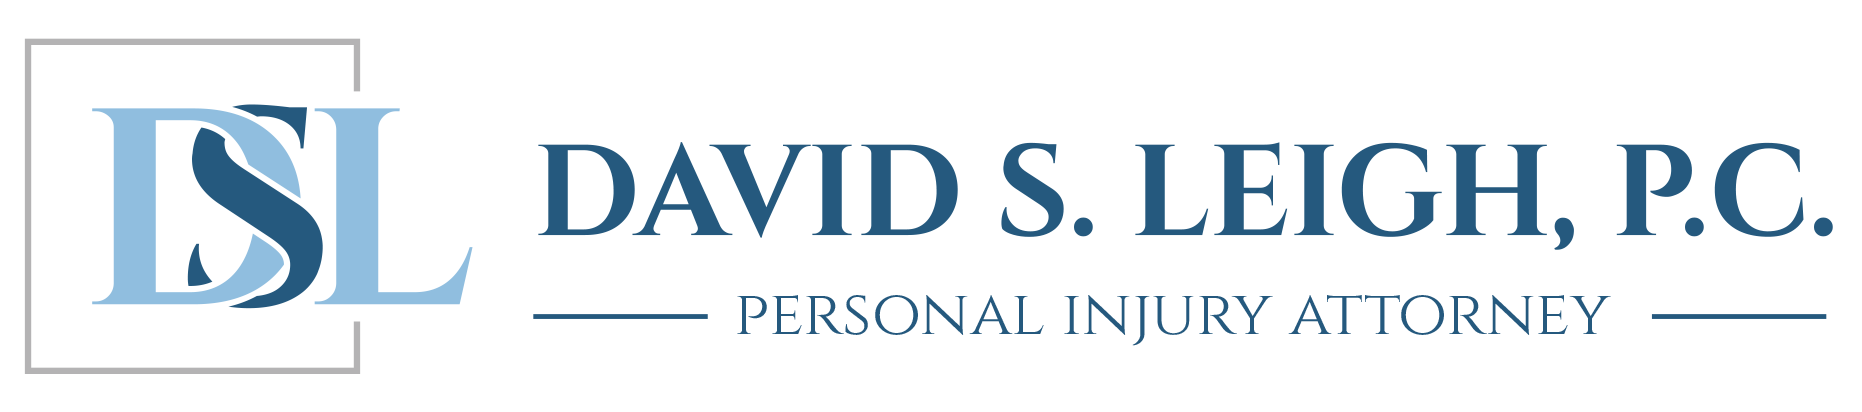 Law Office of David S. Leigh, Personal Injury Attorney and Car Accident Lawyer | Slip and Fall Law Firm